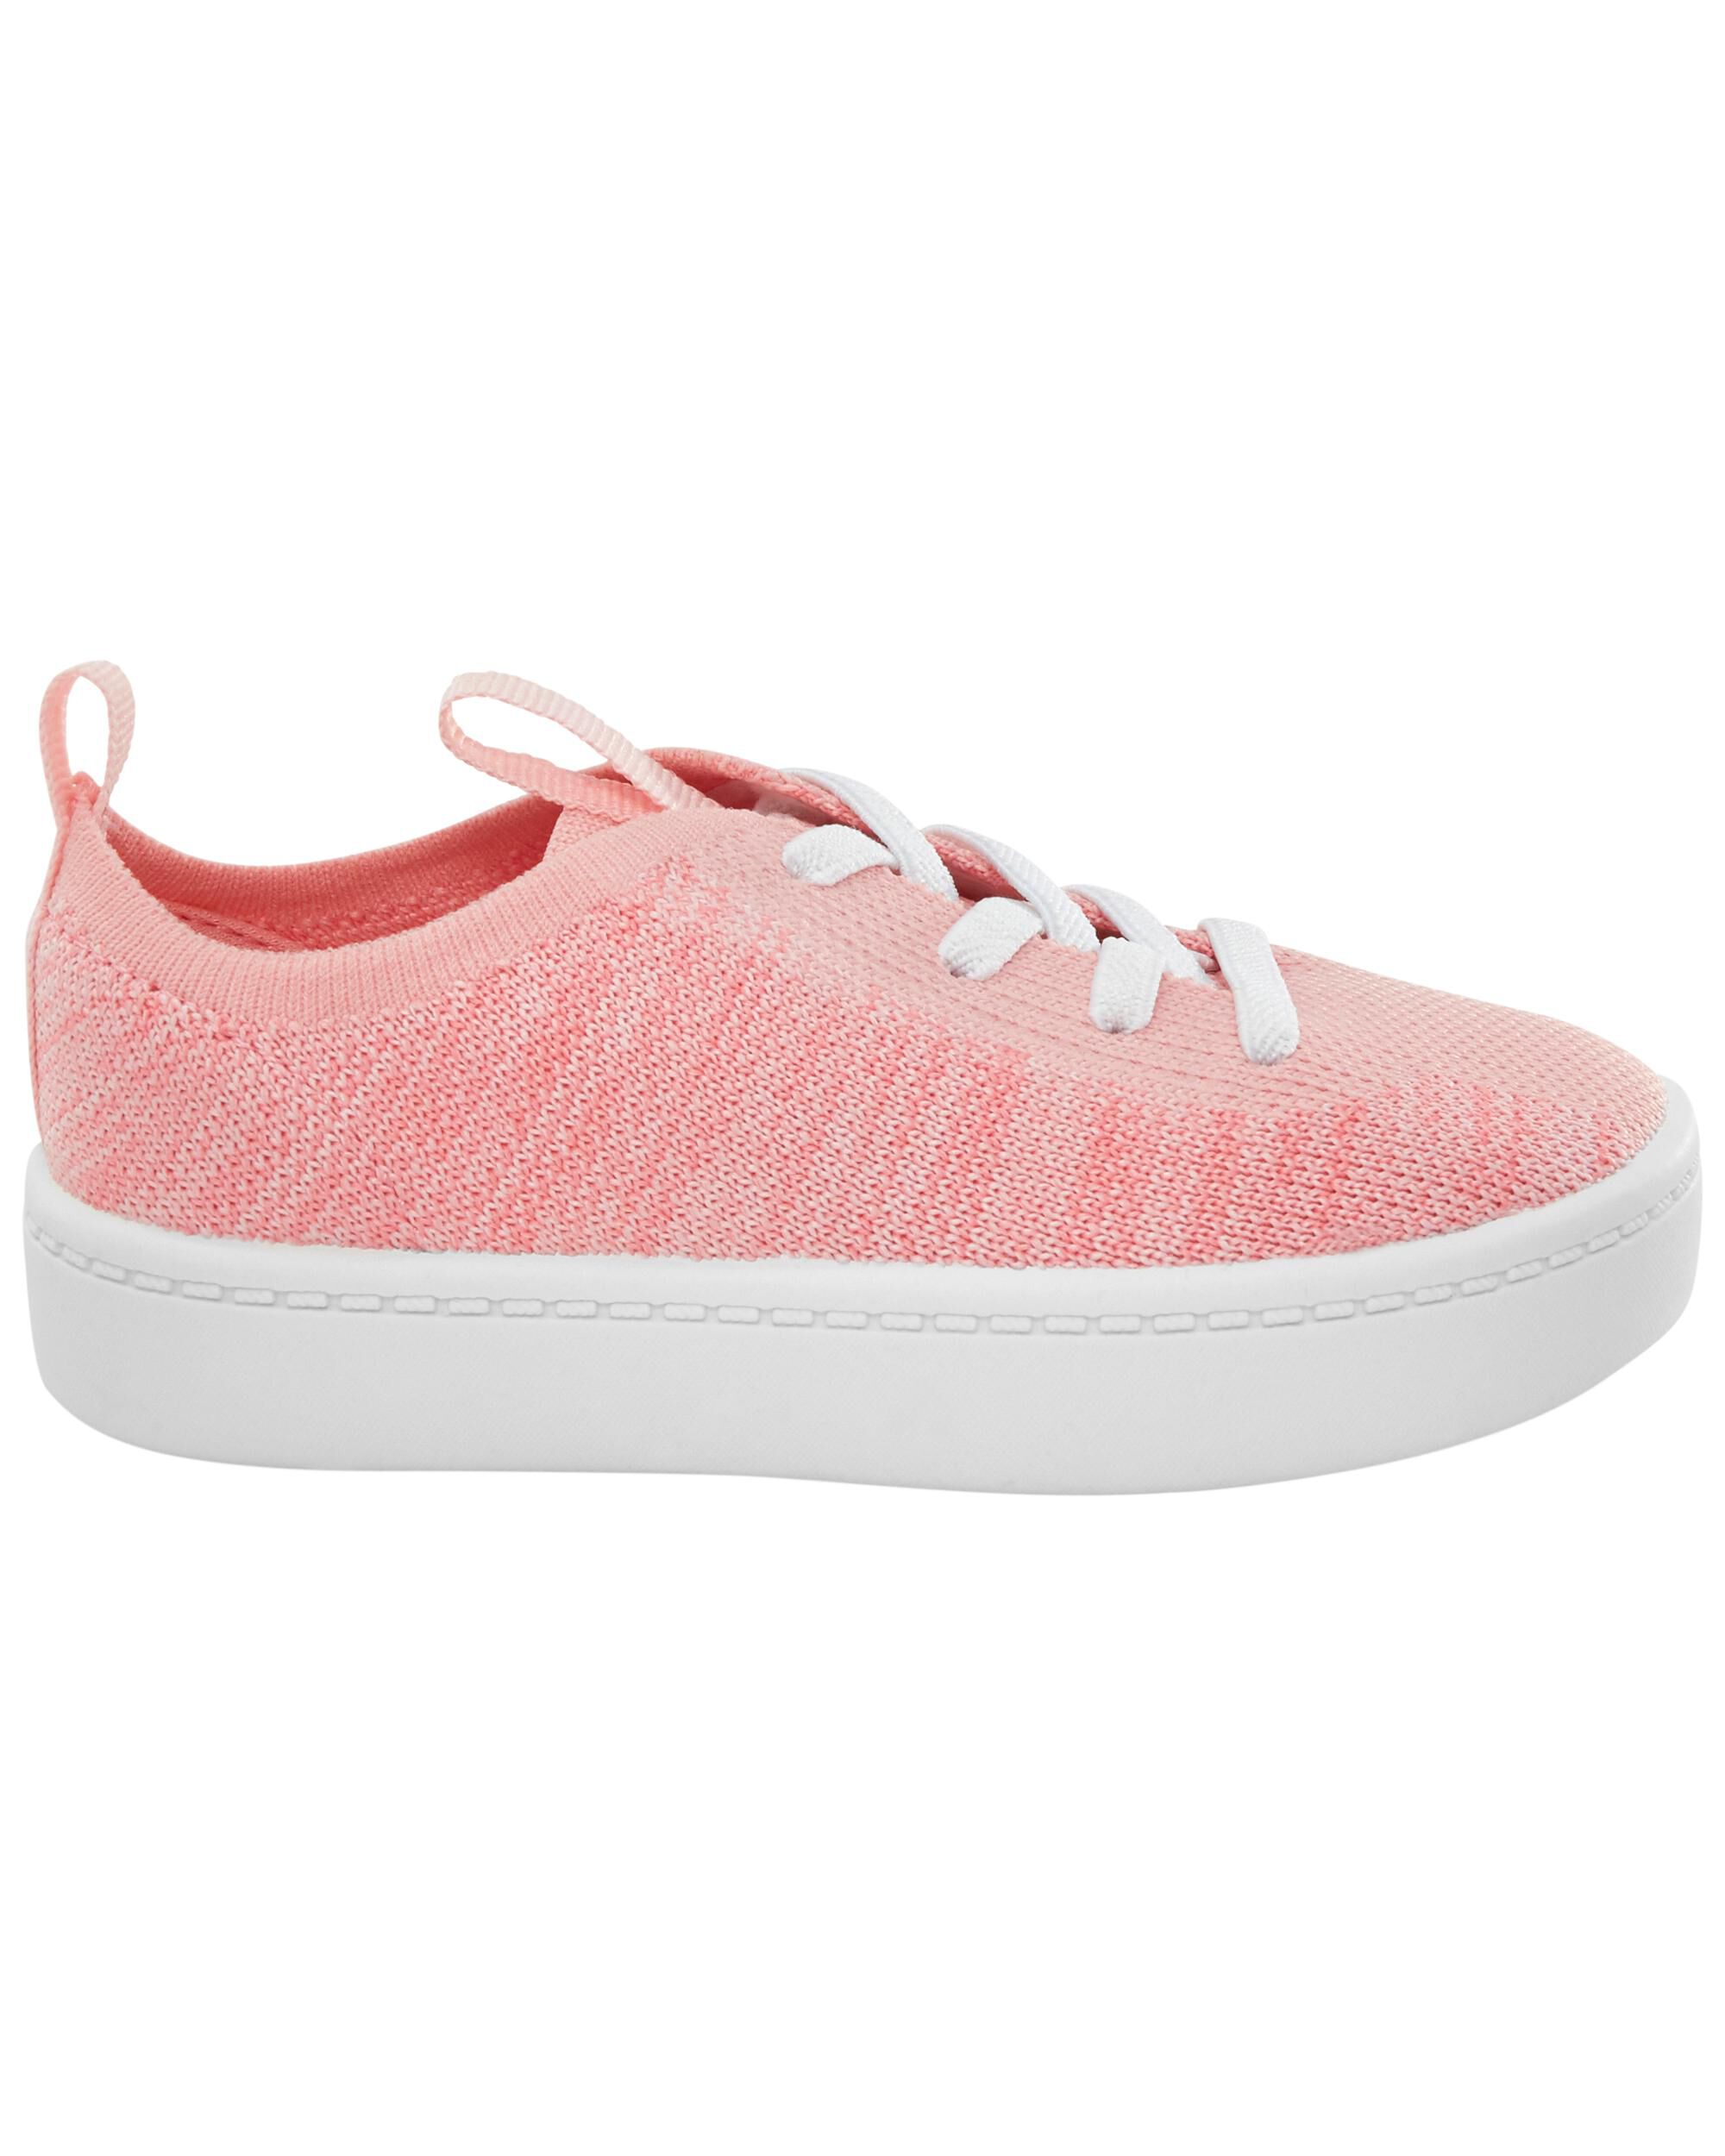 Toddler Knit Sneakers